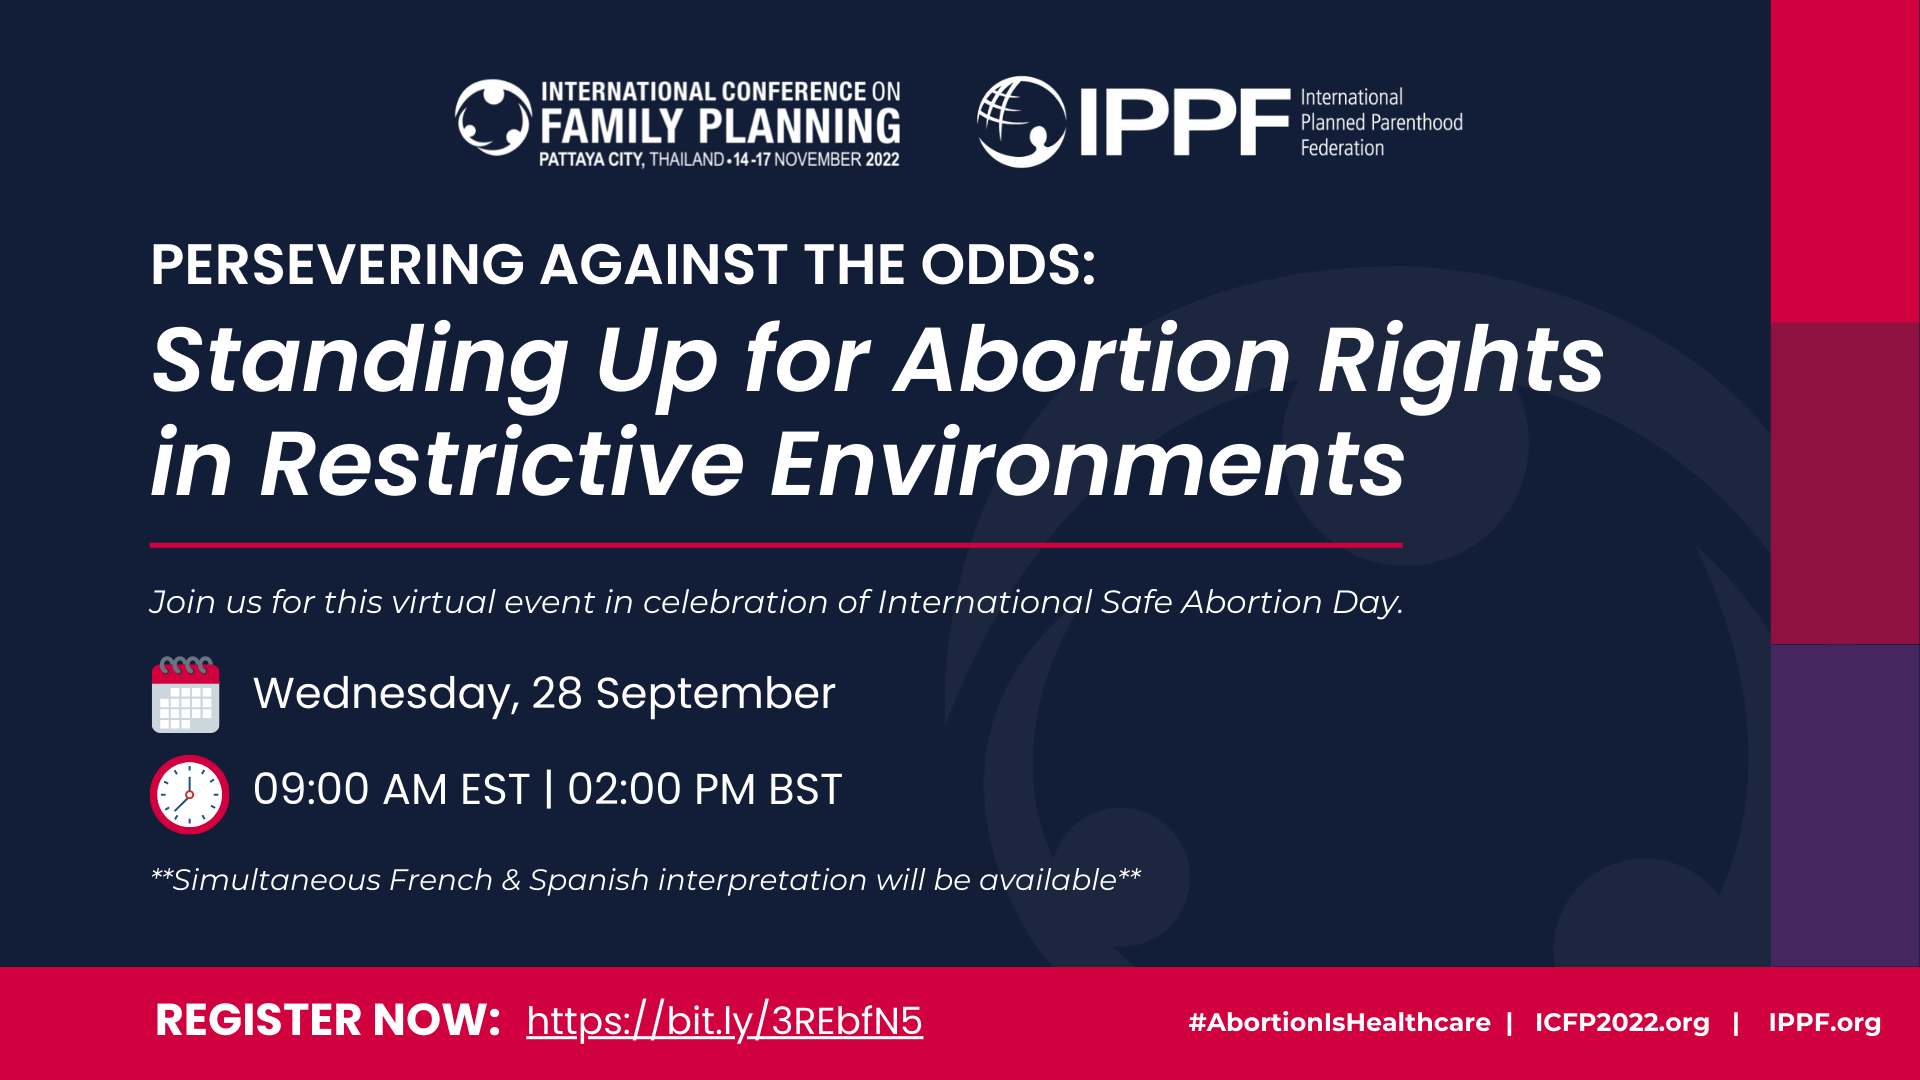 Persevering against the odds: standing up for abortion rights in restrictive environments